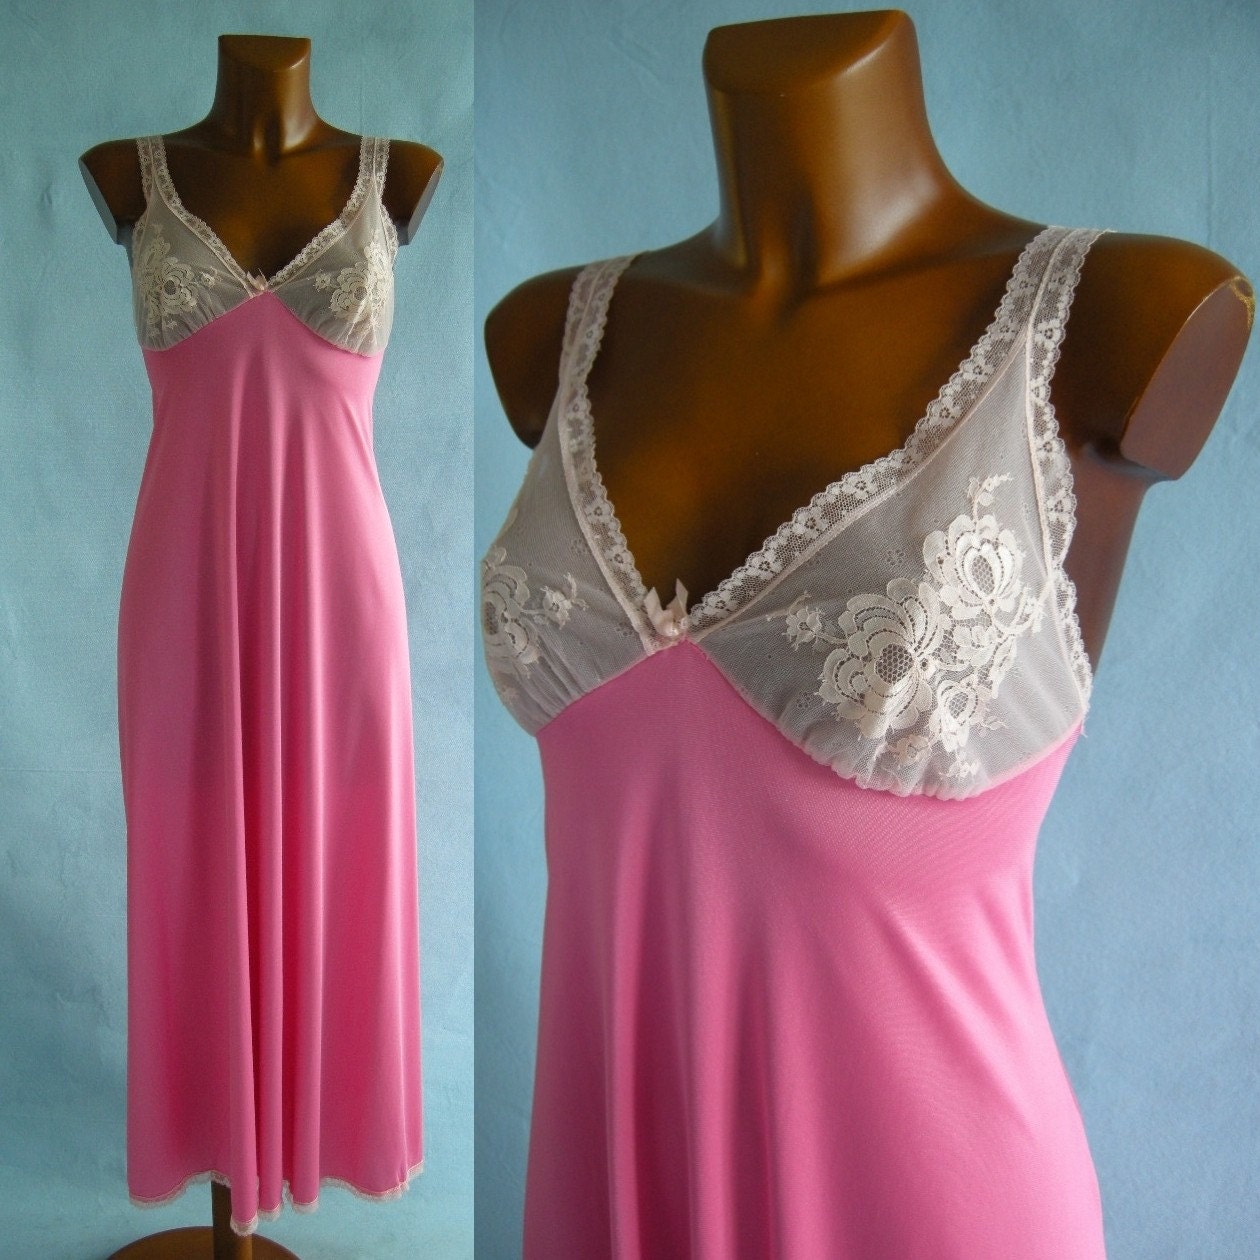 BRIGHT Pink Vintage 70s Nightgown With Sheer Lace Cups Kayser 